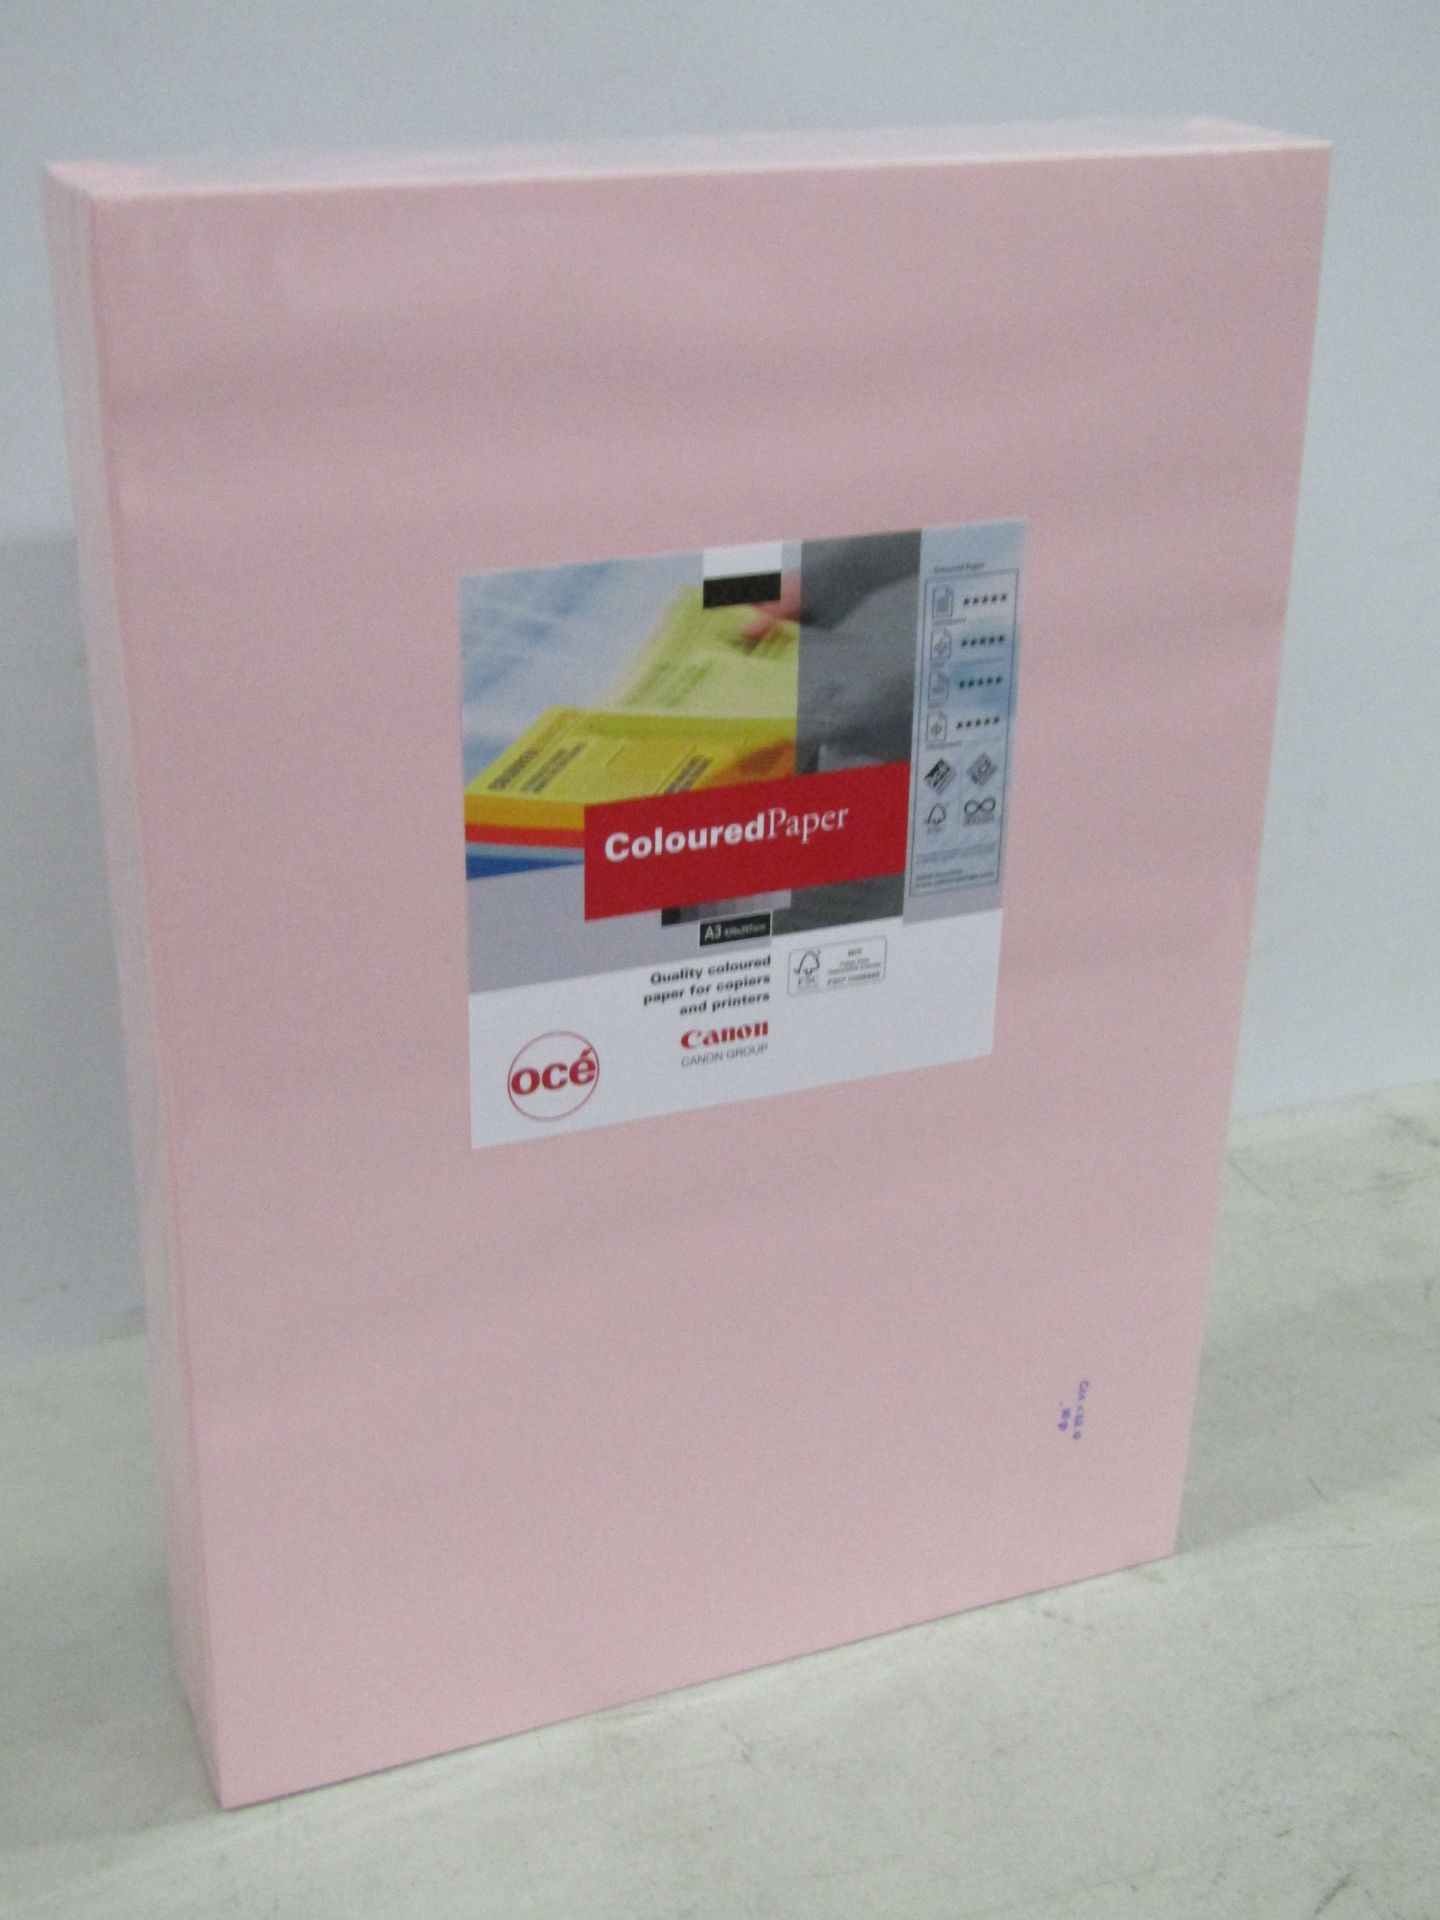 Box of 5x Canon a3 pink coloured copier and printer paper.